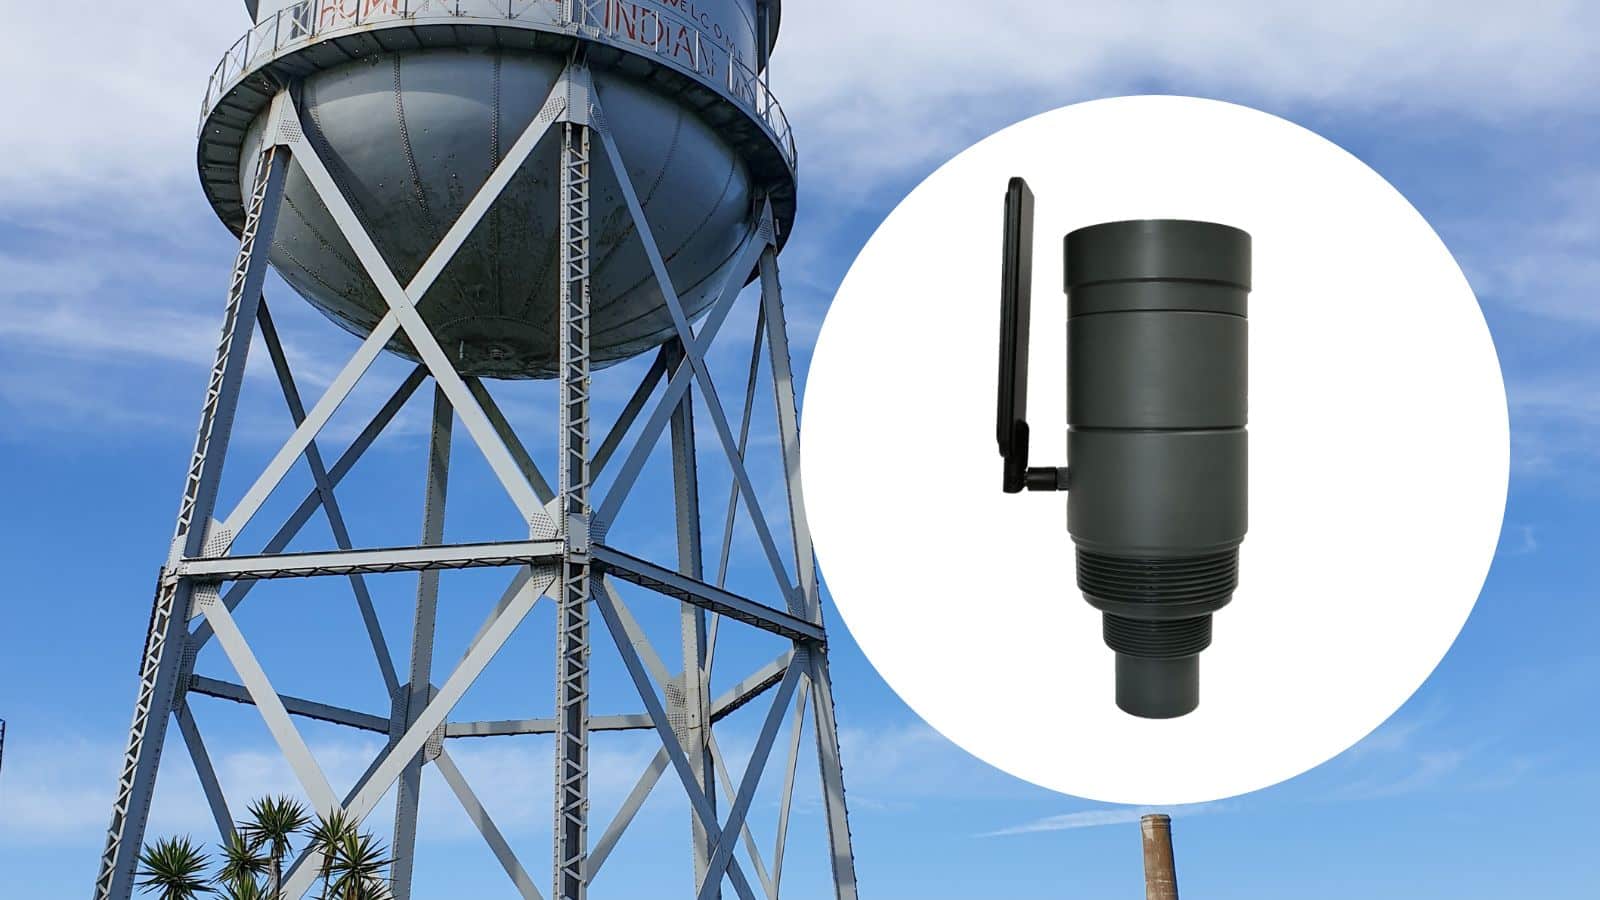 remote ultrasonic level sensor for water towers, remote water tower level monitoring